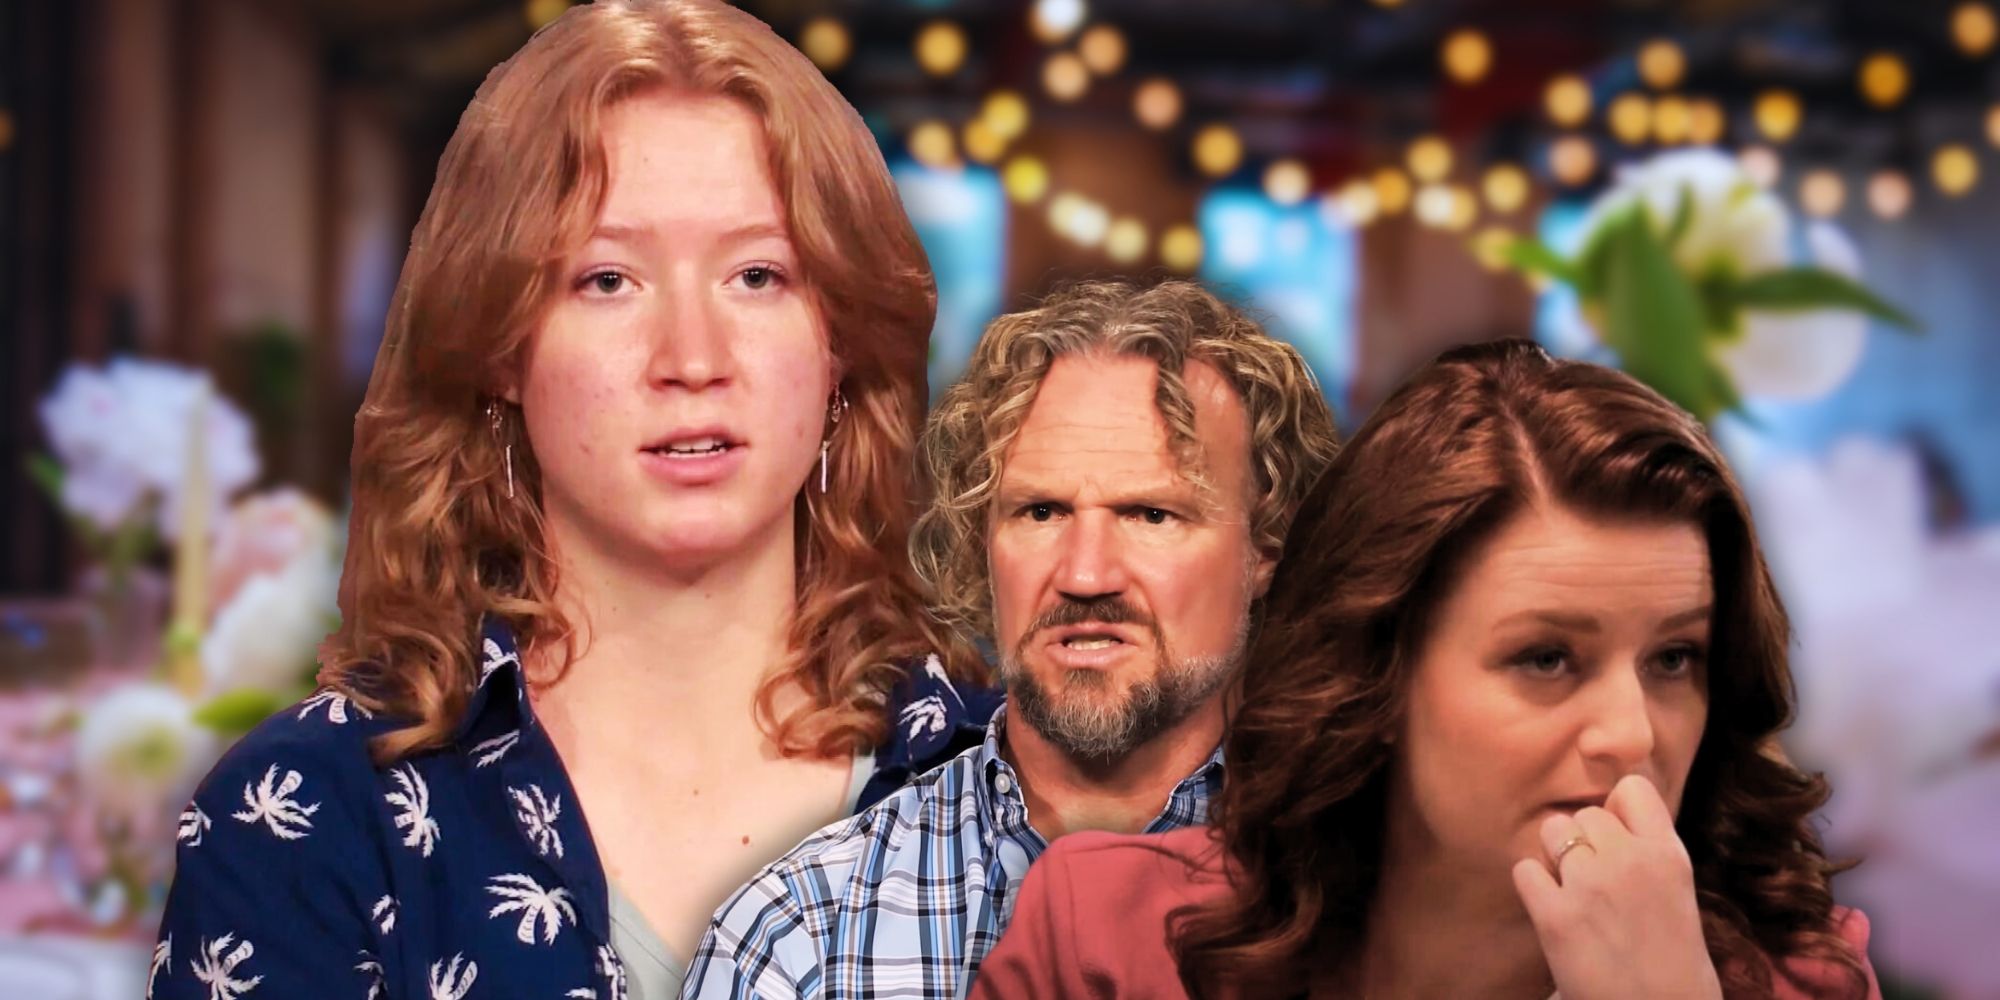 Sister Wives' Gwendlyn Brown, Kody Brown and Robyn Brown looking serious and angry